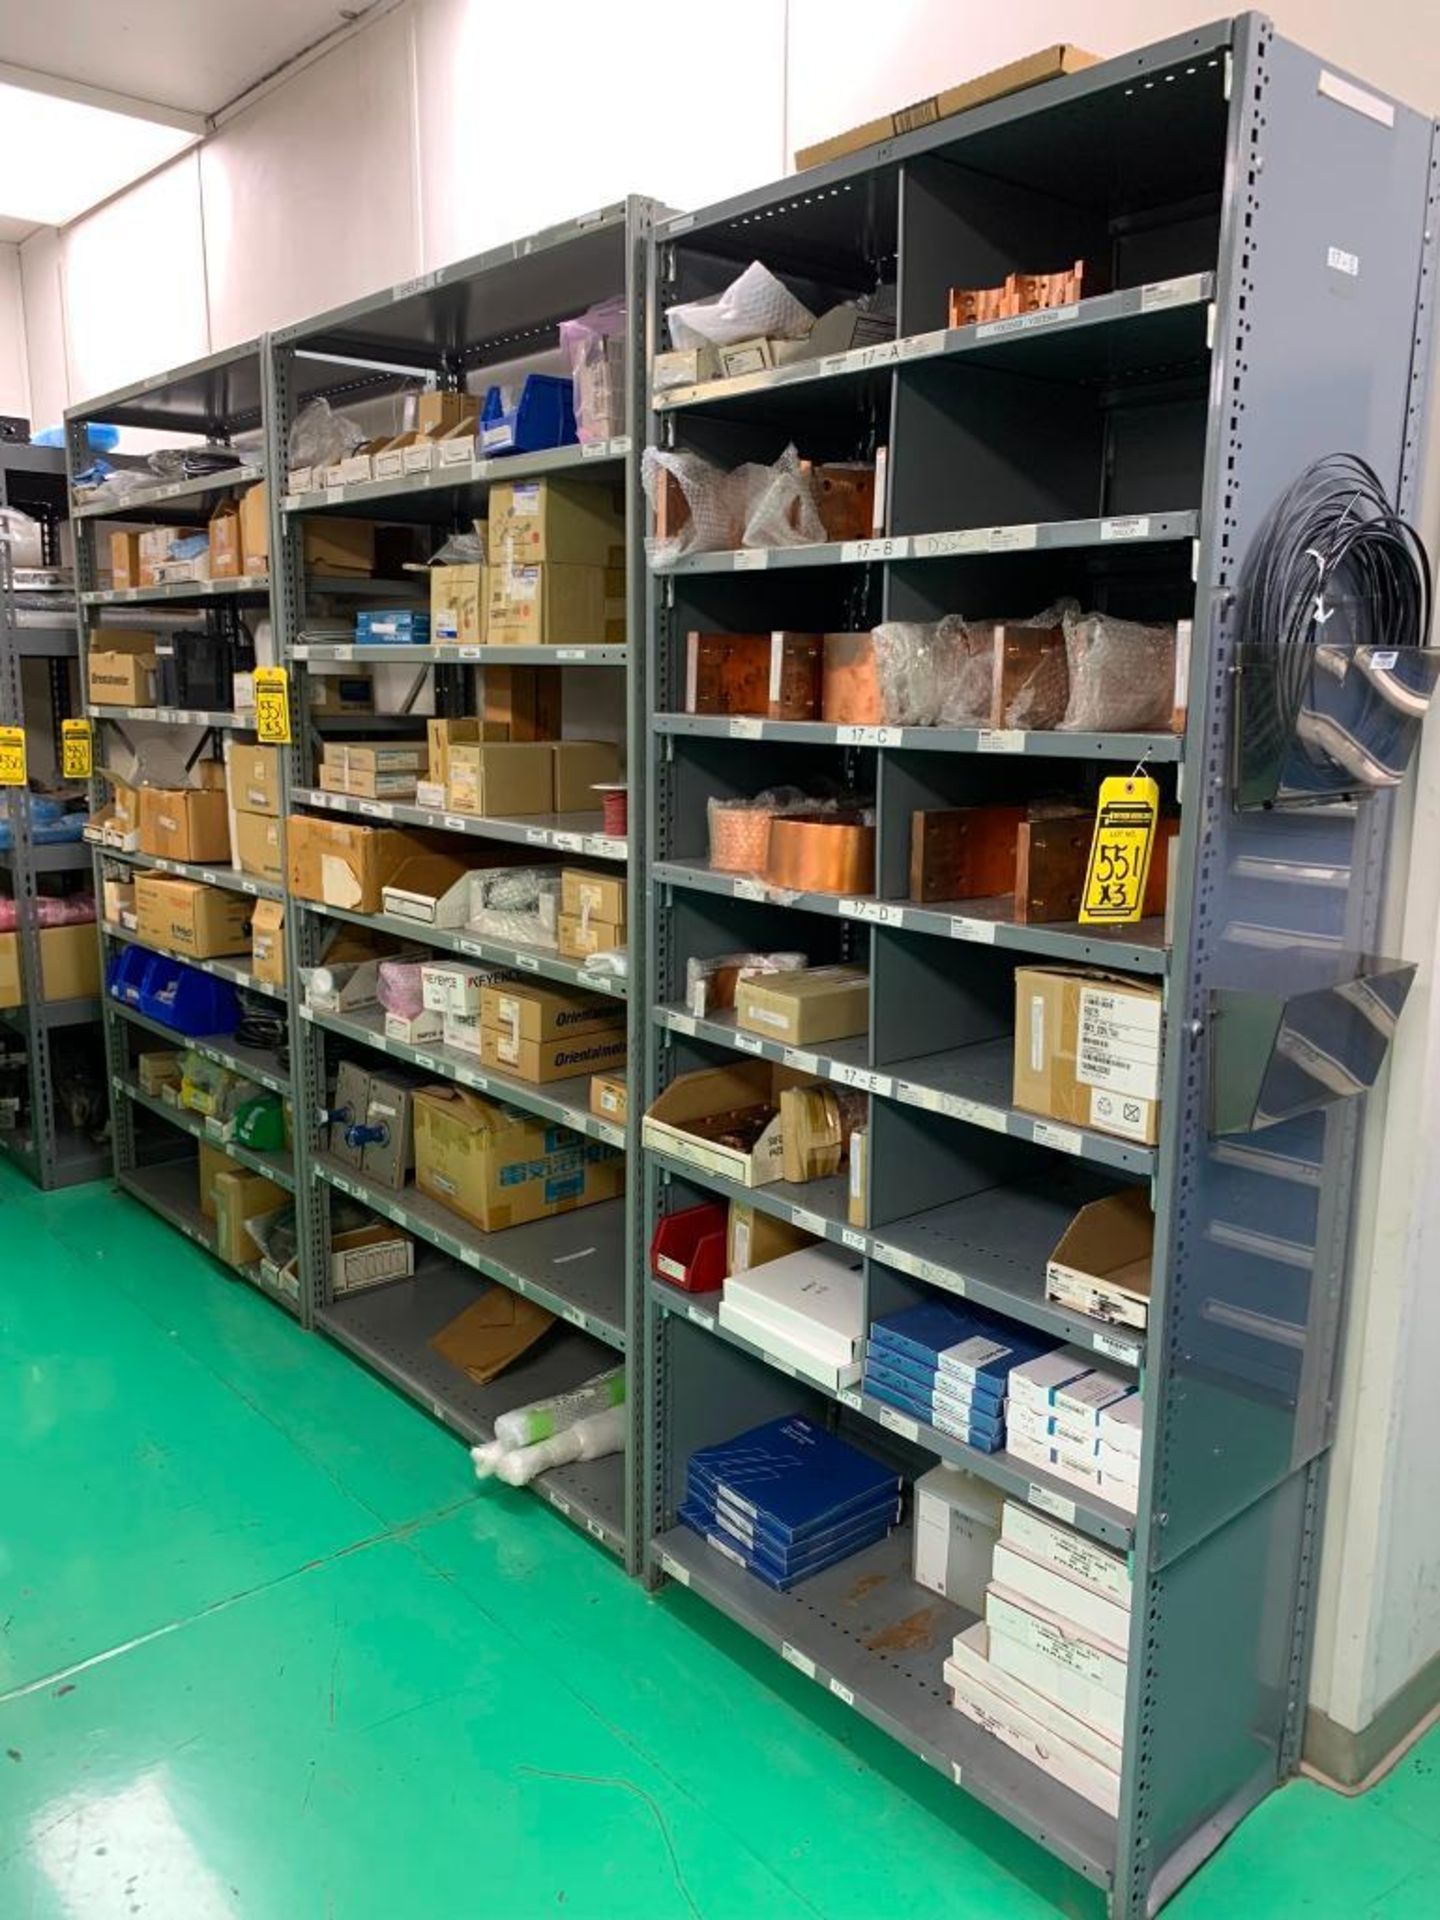 (3x) Bays of Penco Shelving w/ Content: Hand Valves, Cylinders, Fans, Solenoid Valves, Copper Bands,